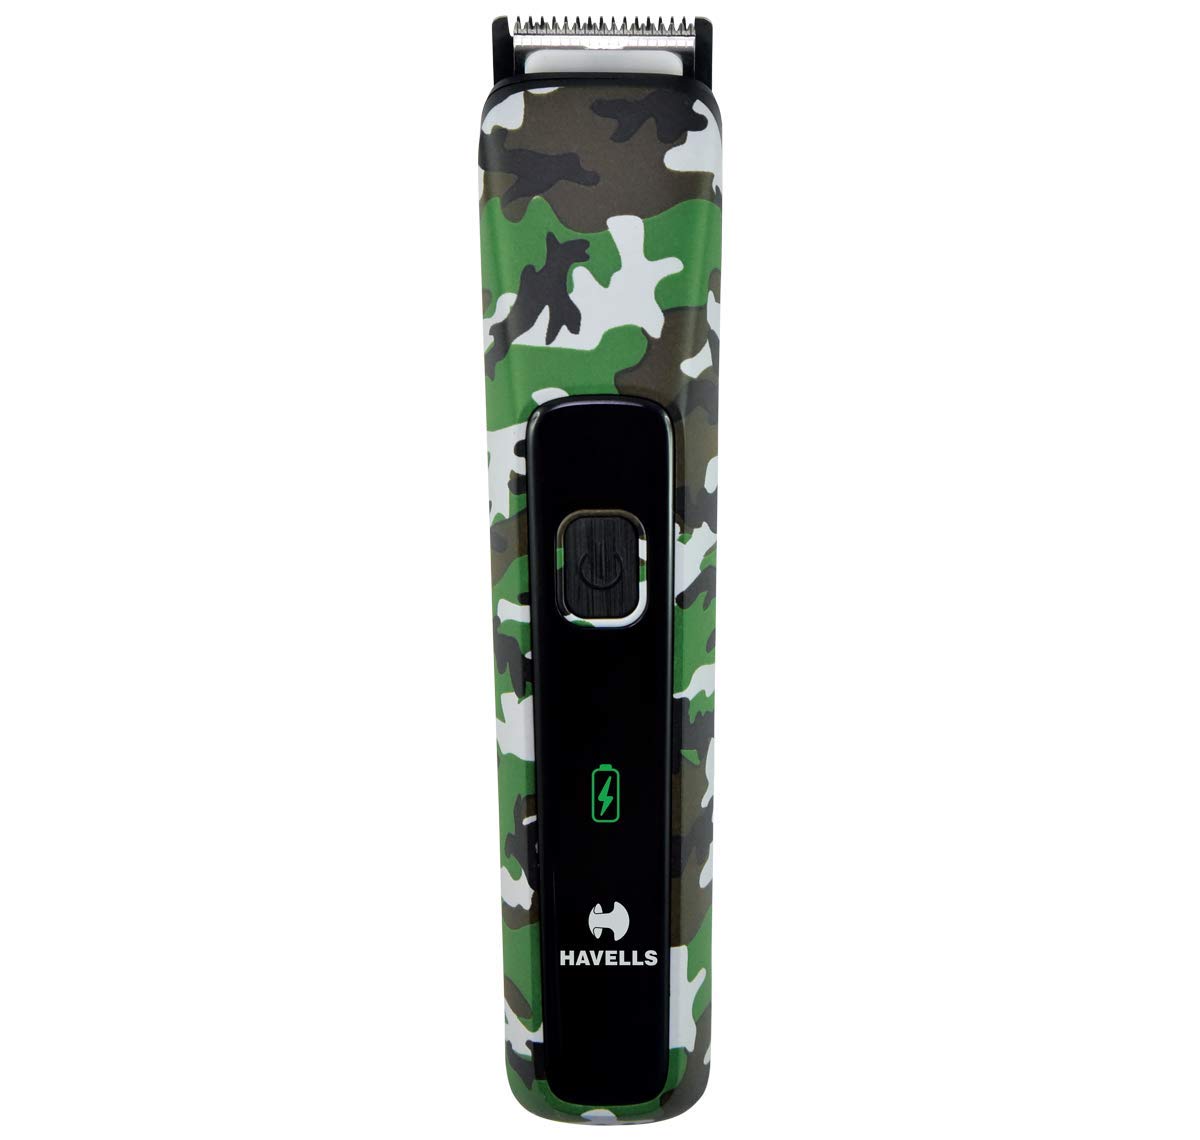 Havells BT5113 C Rechargeable Beard Trimmer Military Black & Green